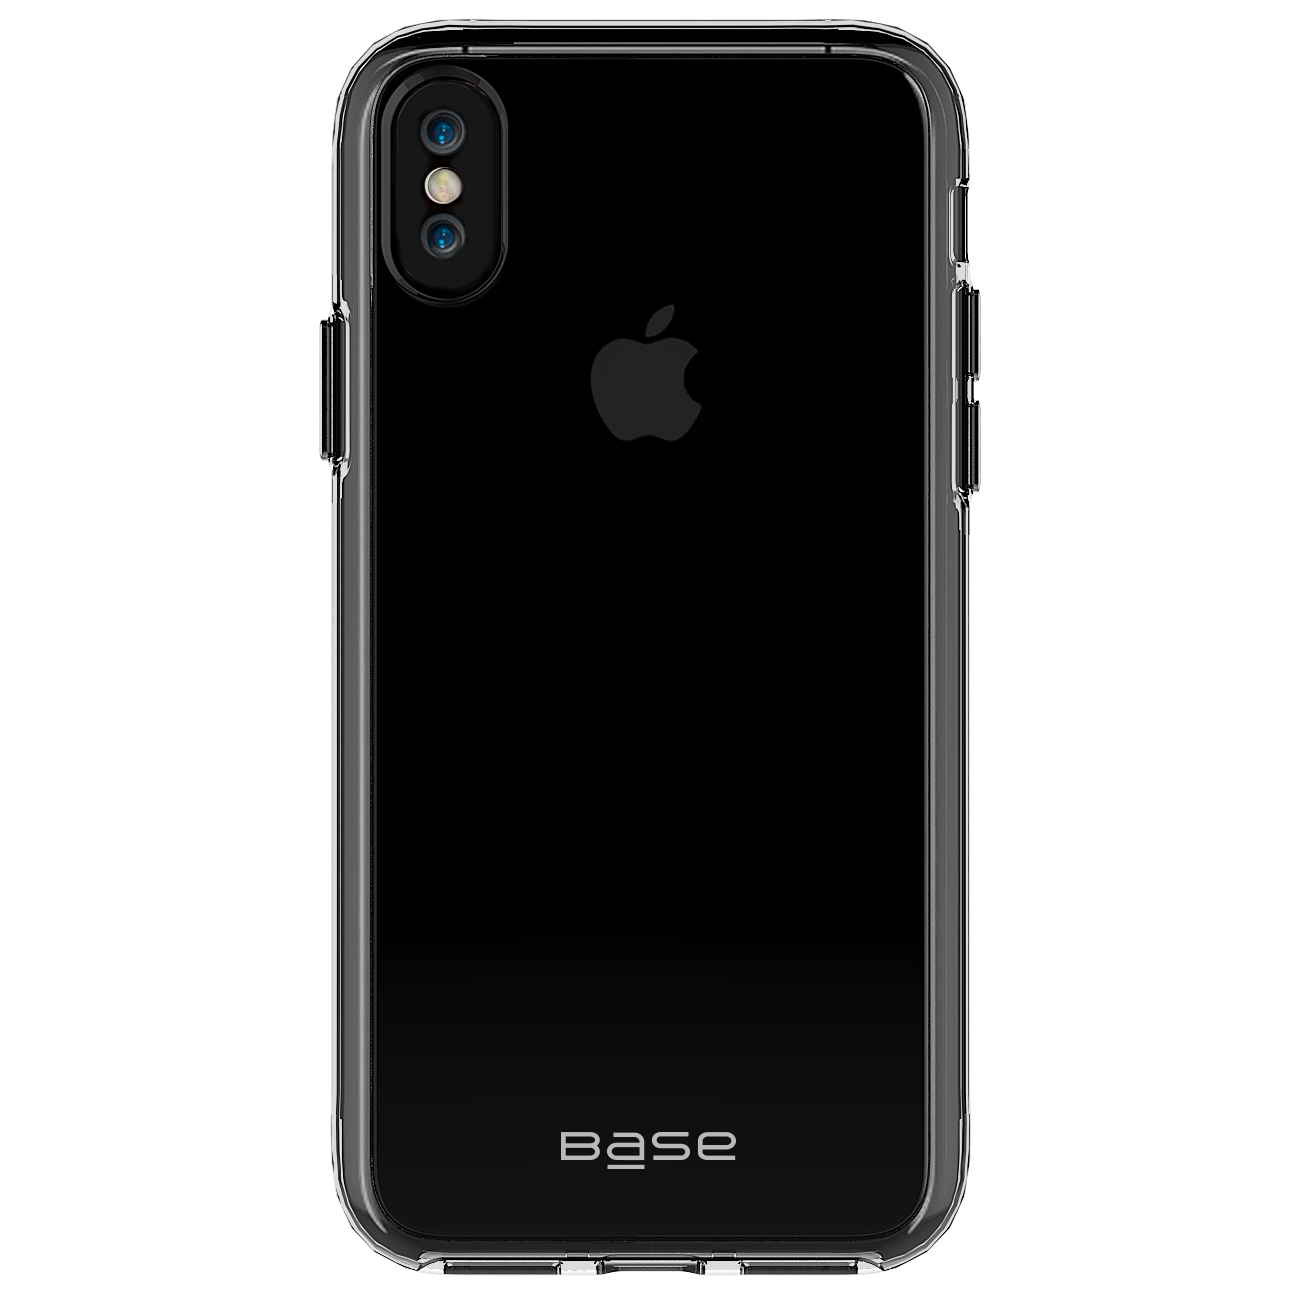 Base Crystal Shield - Reinforced Bumper Protective Case for iPhone X - Black